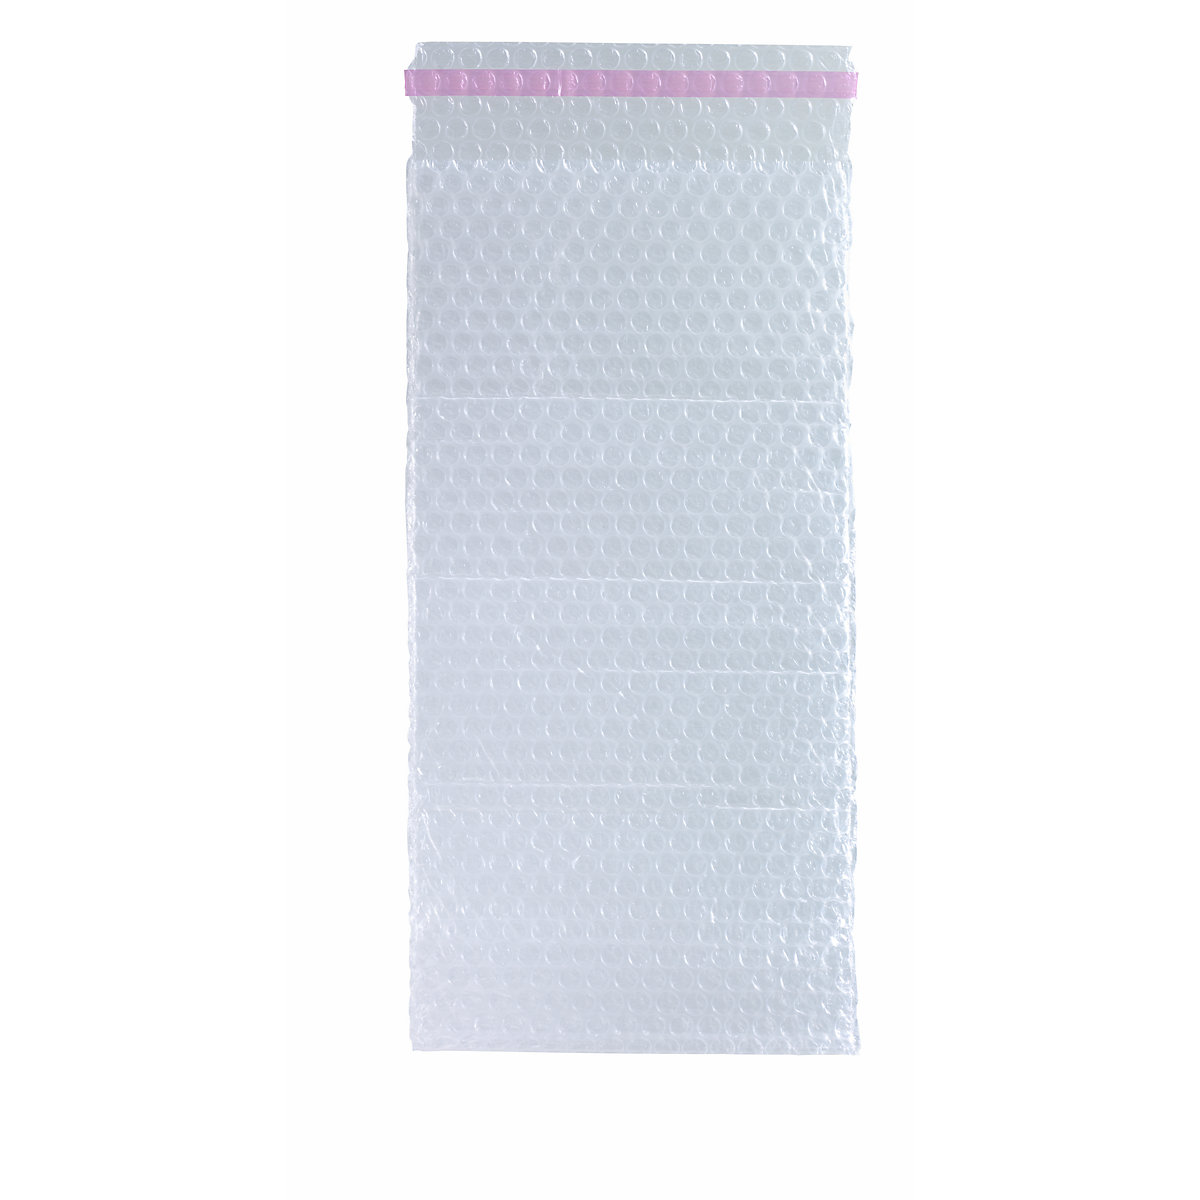 Bubble wrap film bag, 3-ply, self adhesive, film thickness 80 µm, WxL 200 x 400 mm, pack of 250-1